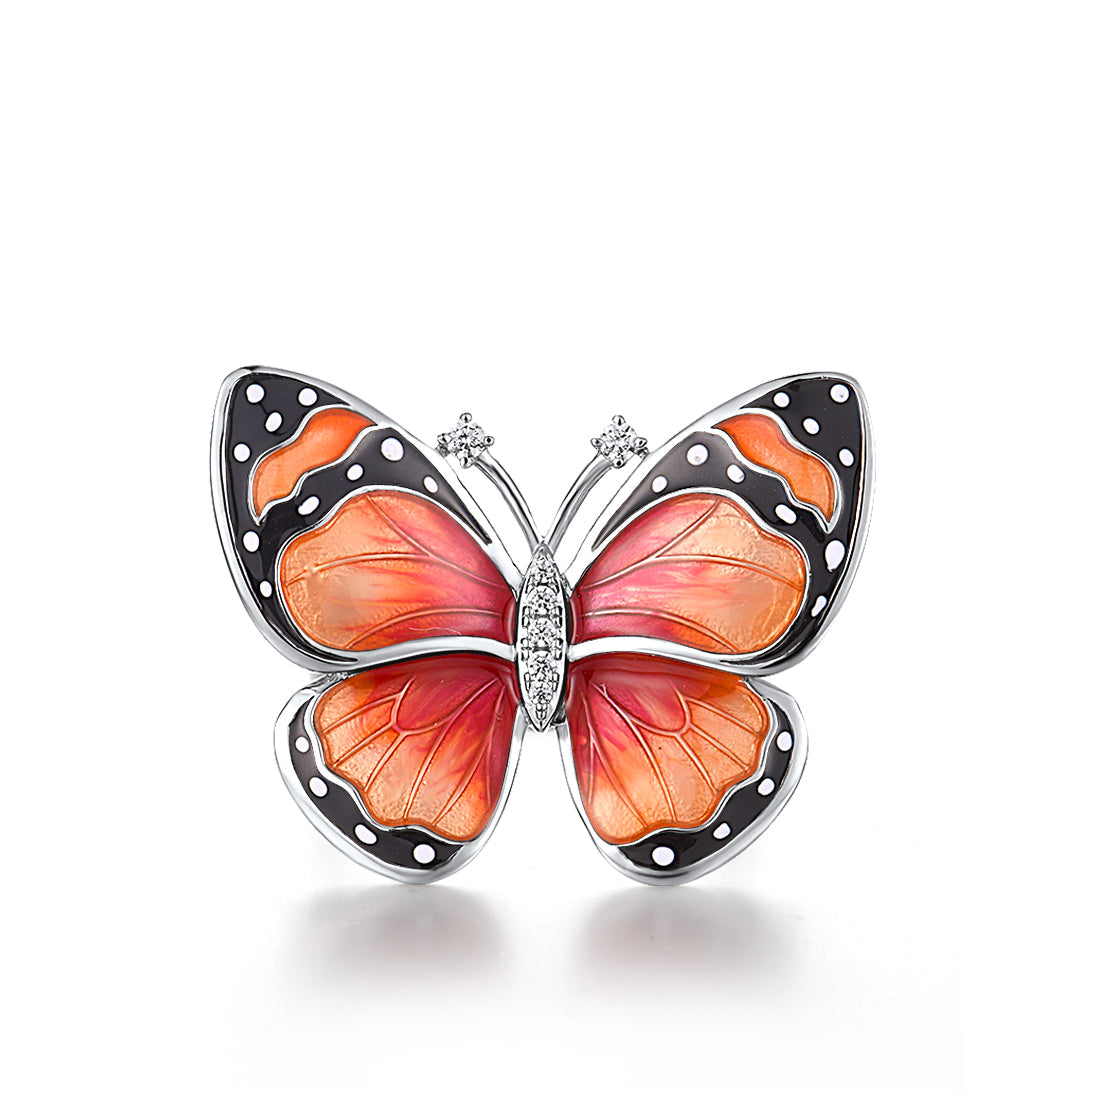 Handmade Luxury 925 Sterling Sliver Painted Enamel White CZ Butterfly Statement Ring